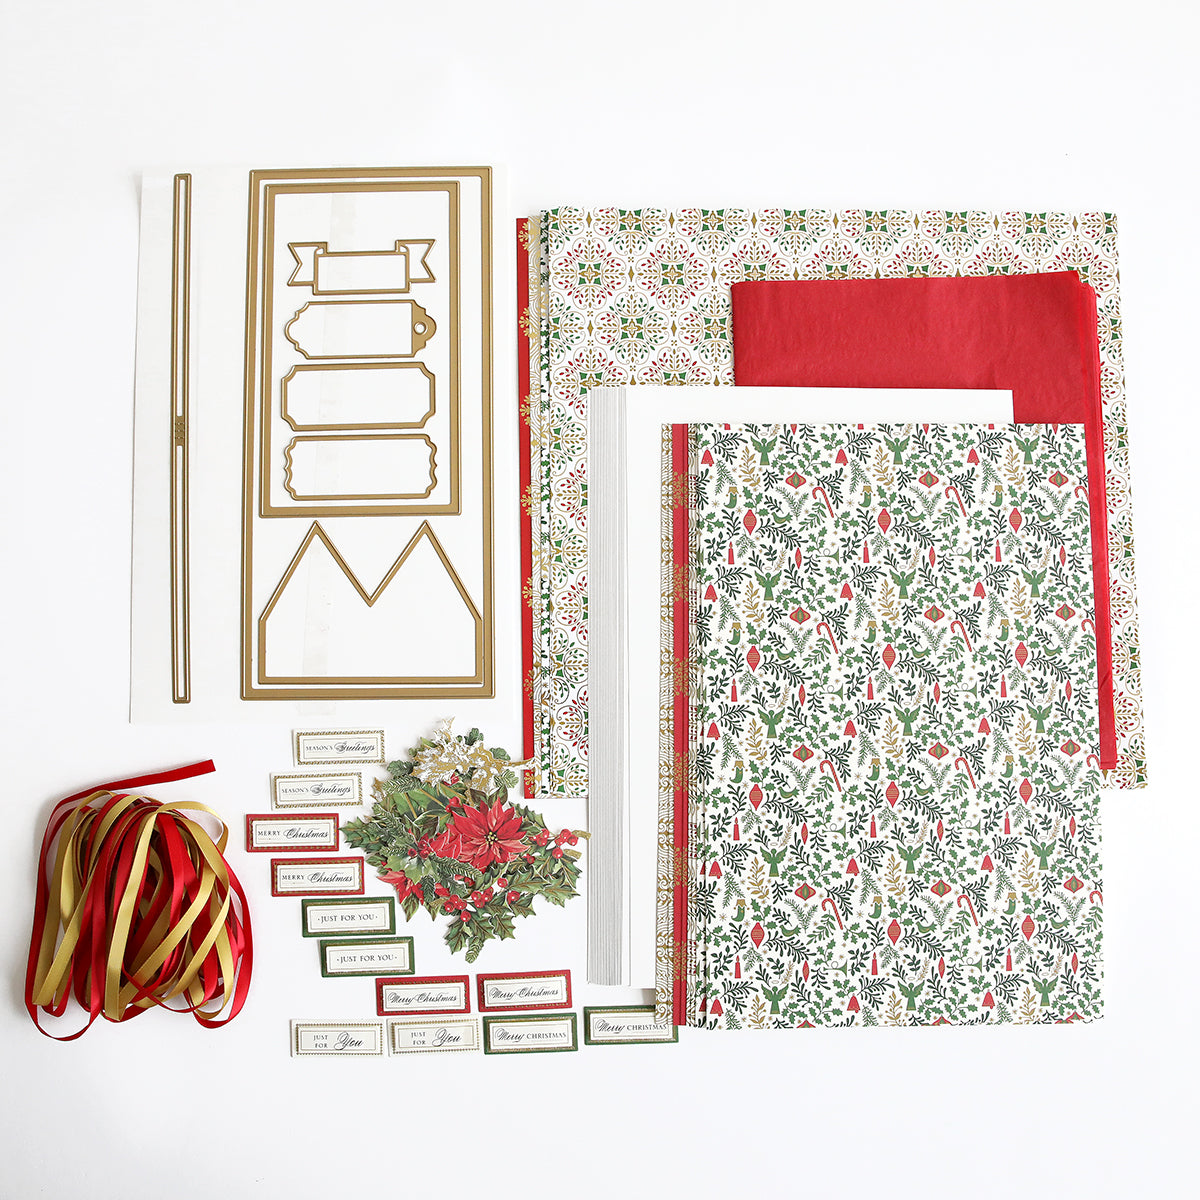 A collection of Anna Griffin Christmas Crackers Class Materials and Dies, ribbons, and small gifts on a white surface.